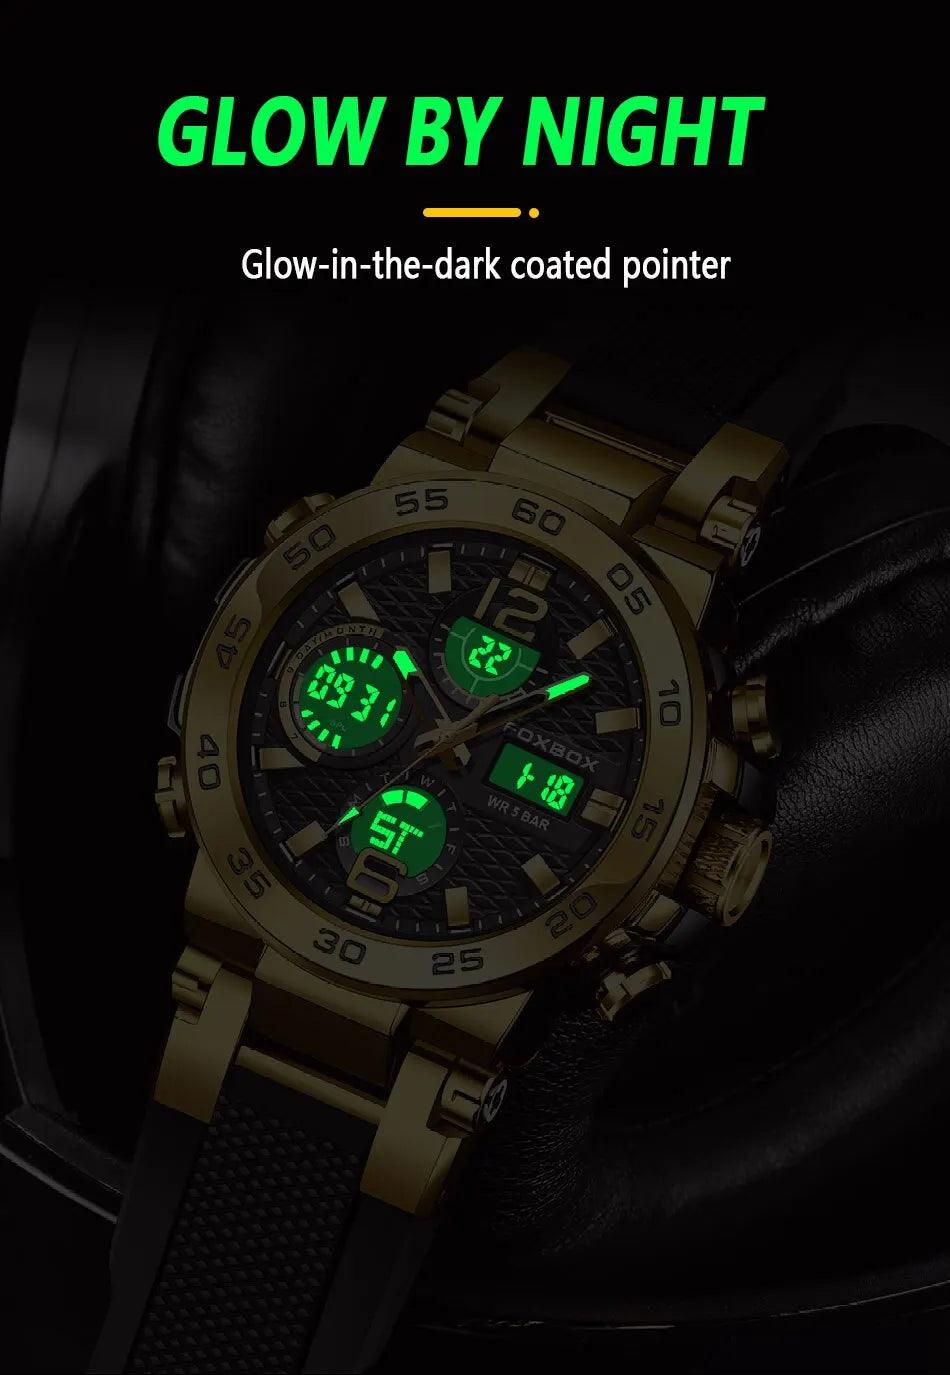 New Top Brand Luxury Sport Waterproof Military Chronograph Fashion Diver Watches - Popular Business Watches - The Jewellery Supermarket